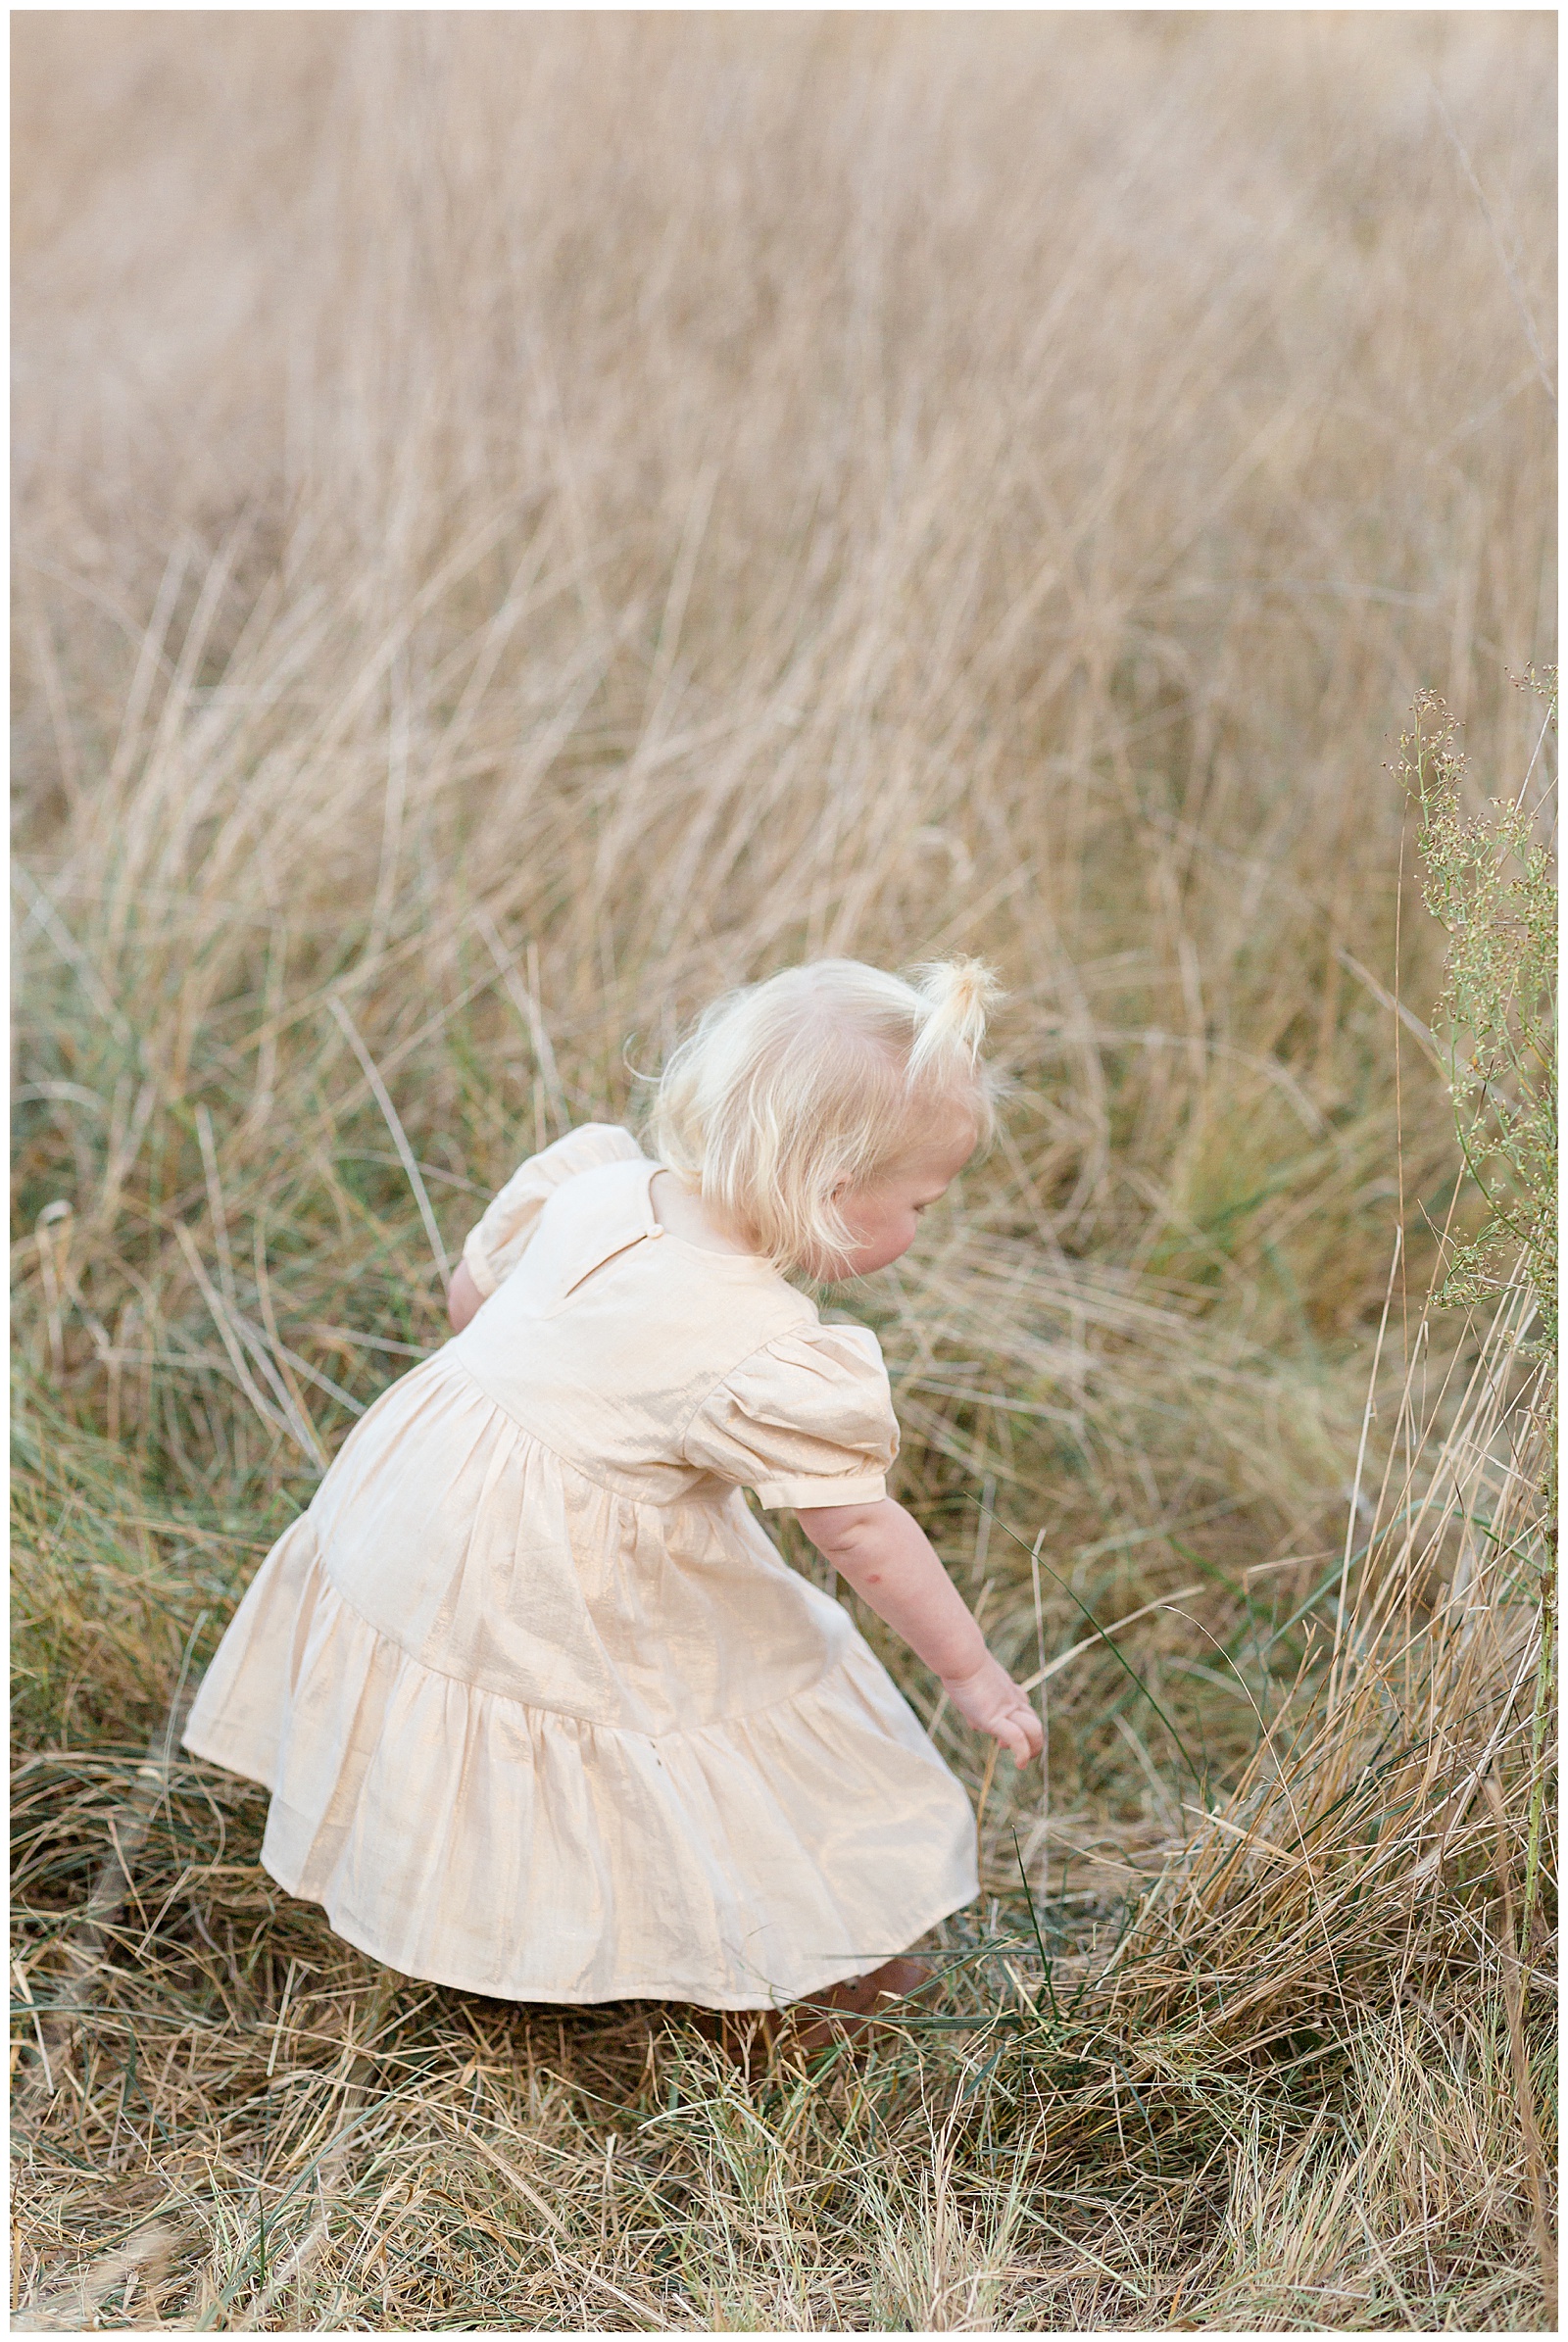 Little girl, who wears a light gold/cream shimmery dress, bends down in a Nashville field and pulls up a piece of long field grass.